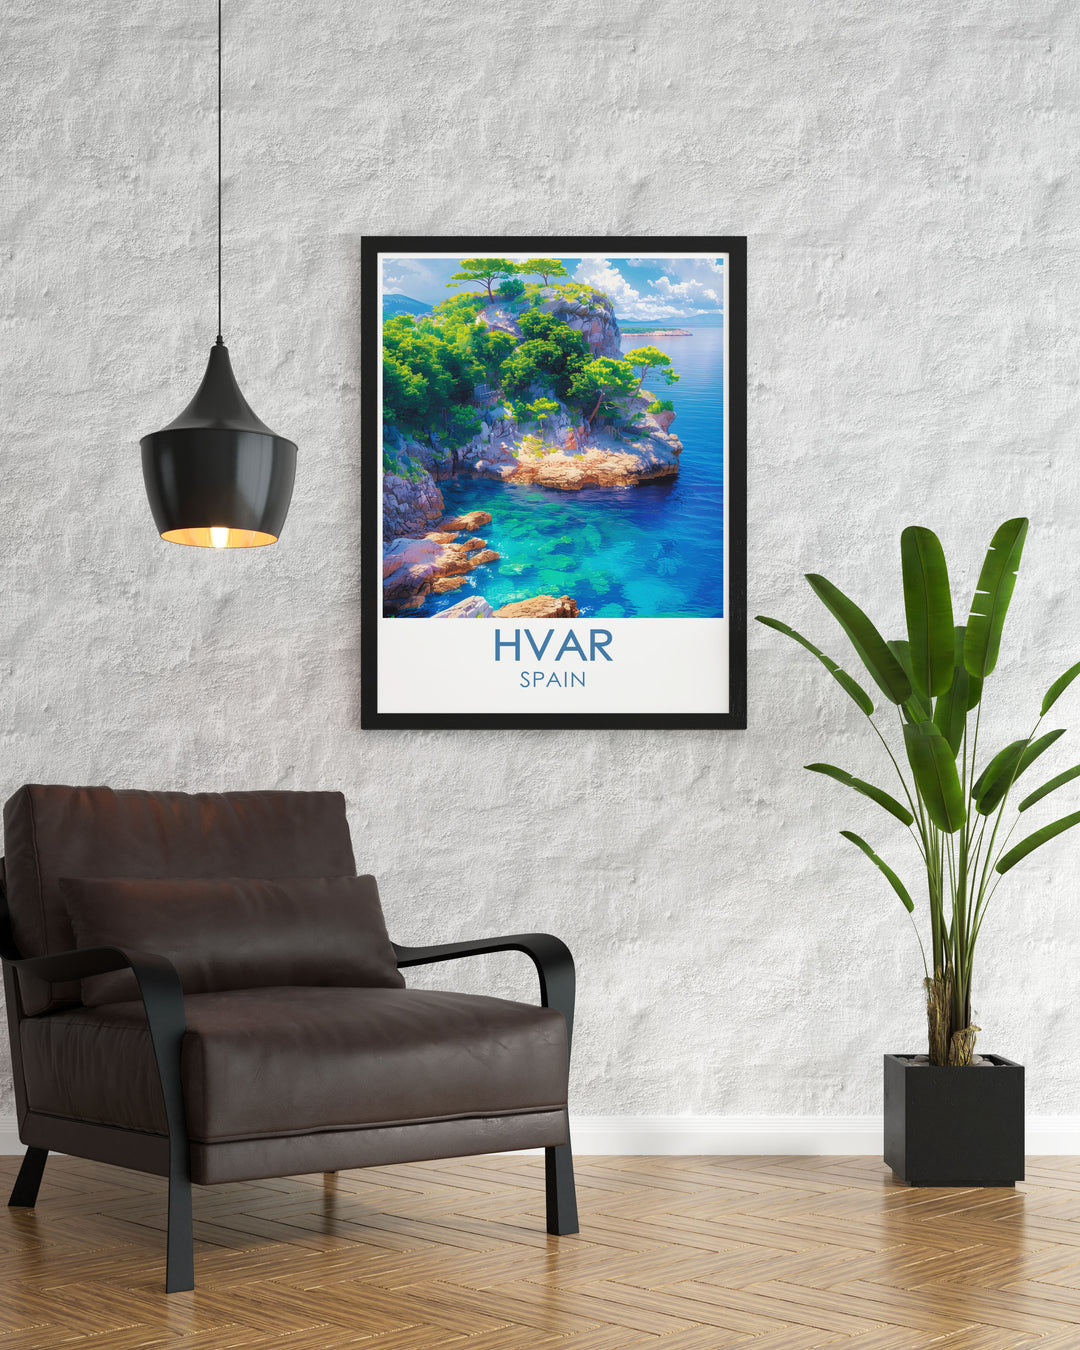 A stunning depiction of Hvars vibrant harbor, filled with sleek yachts and traditional boats. This gallery wall art brings the lively atmosphere and picturesque setting of Hvar into your living space, ideal for those who love coastal charm.